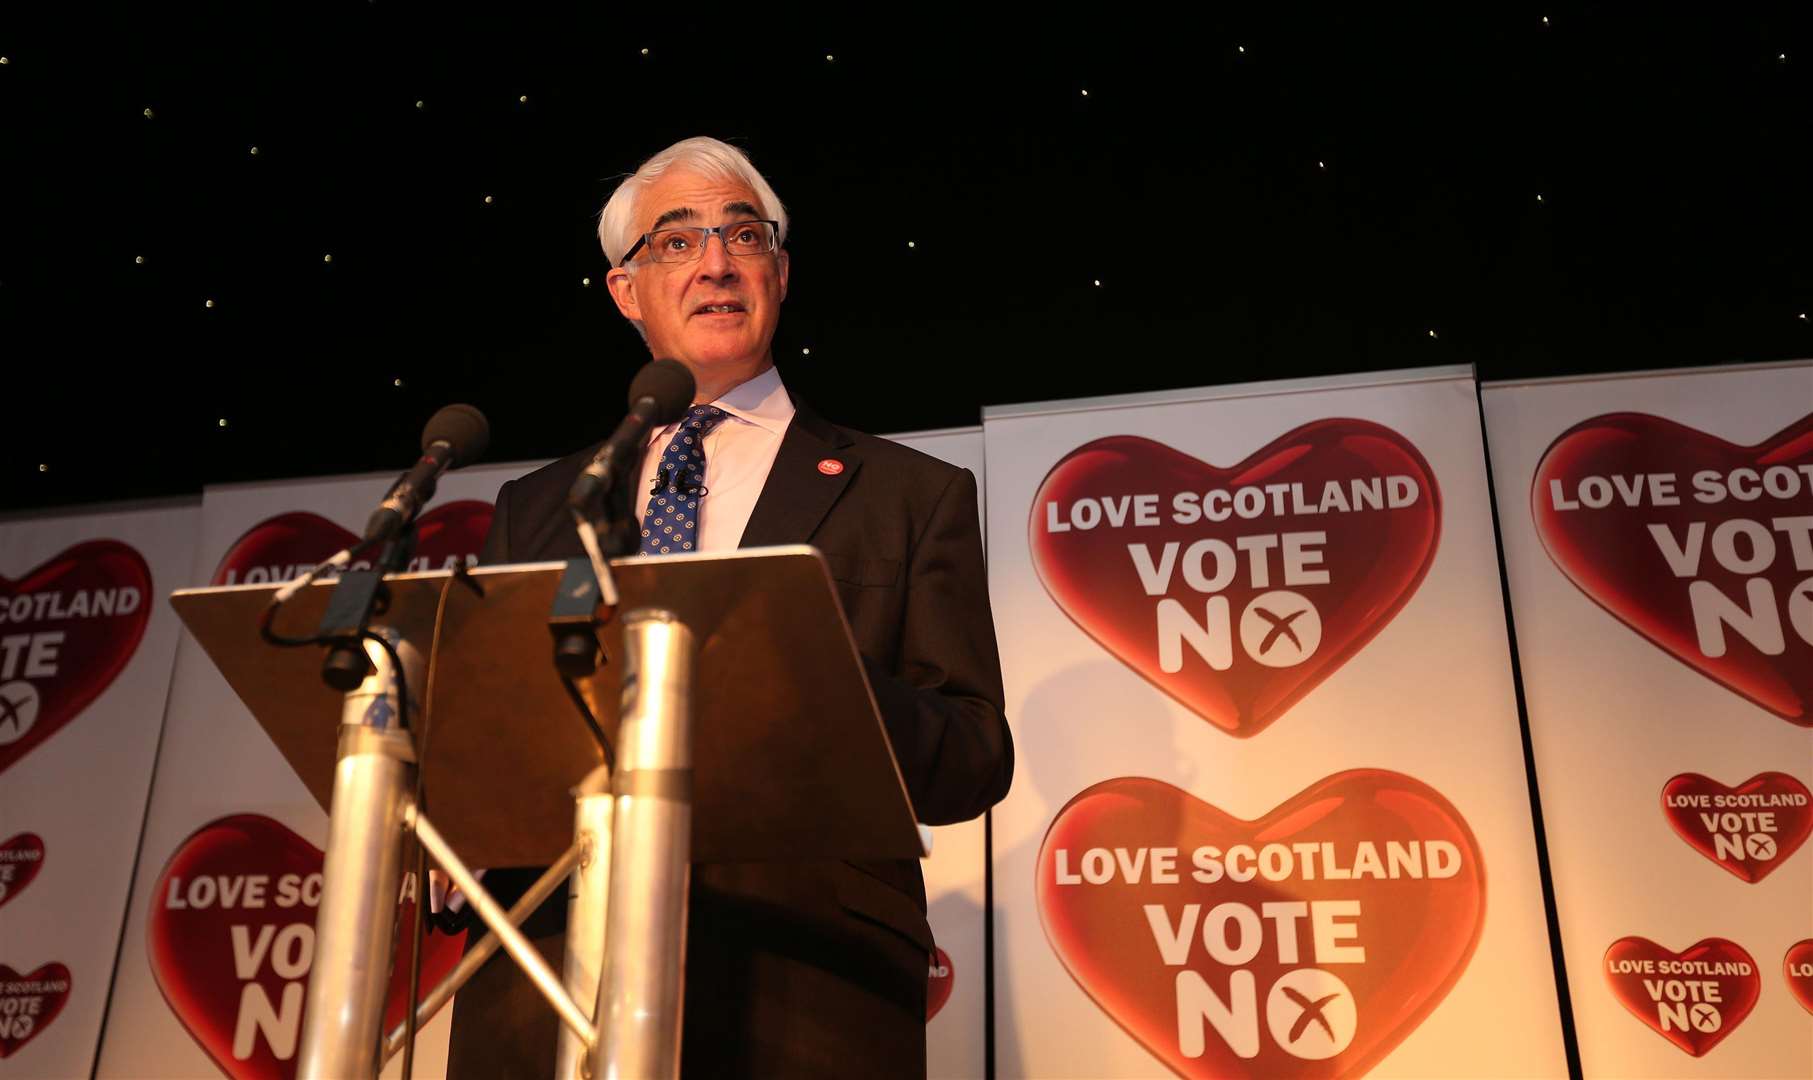 Alistair Darling, who died last month, chaired the campaign to keep Scotland in 2014 (PA Archive)